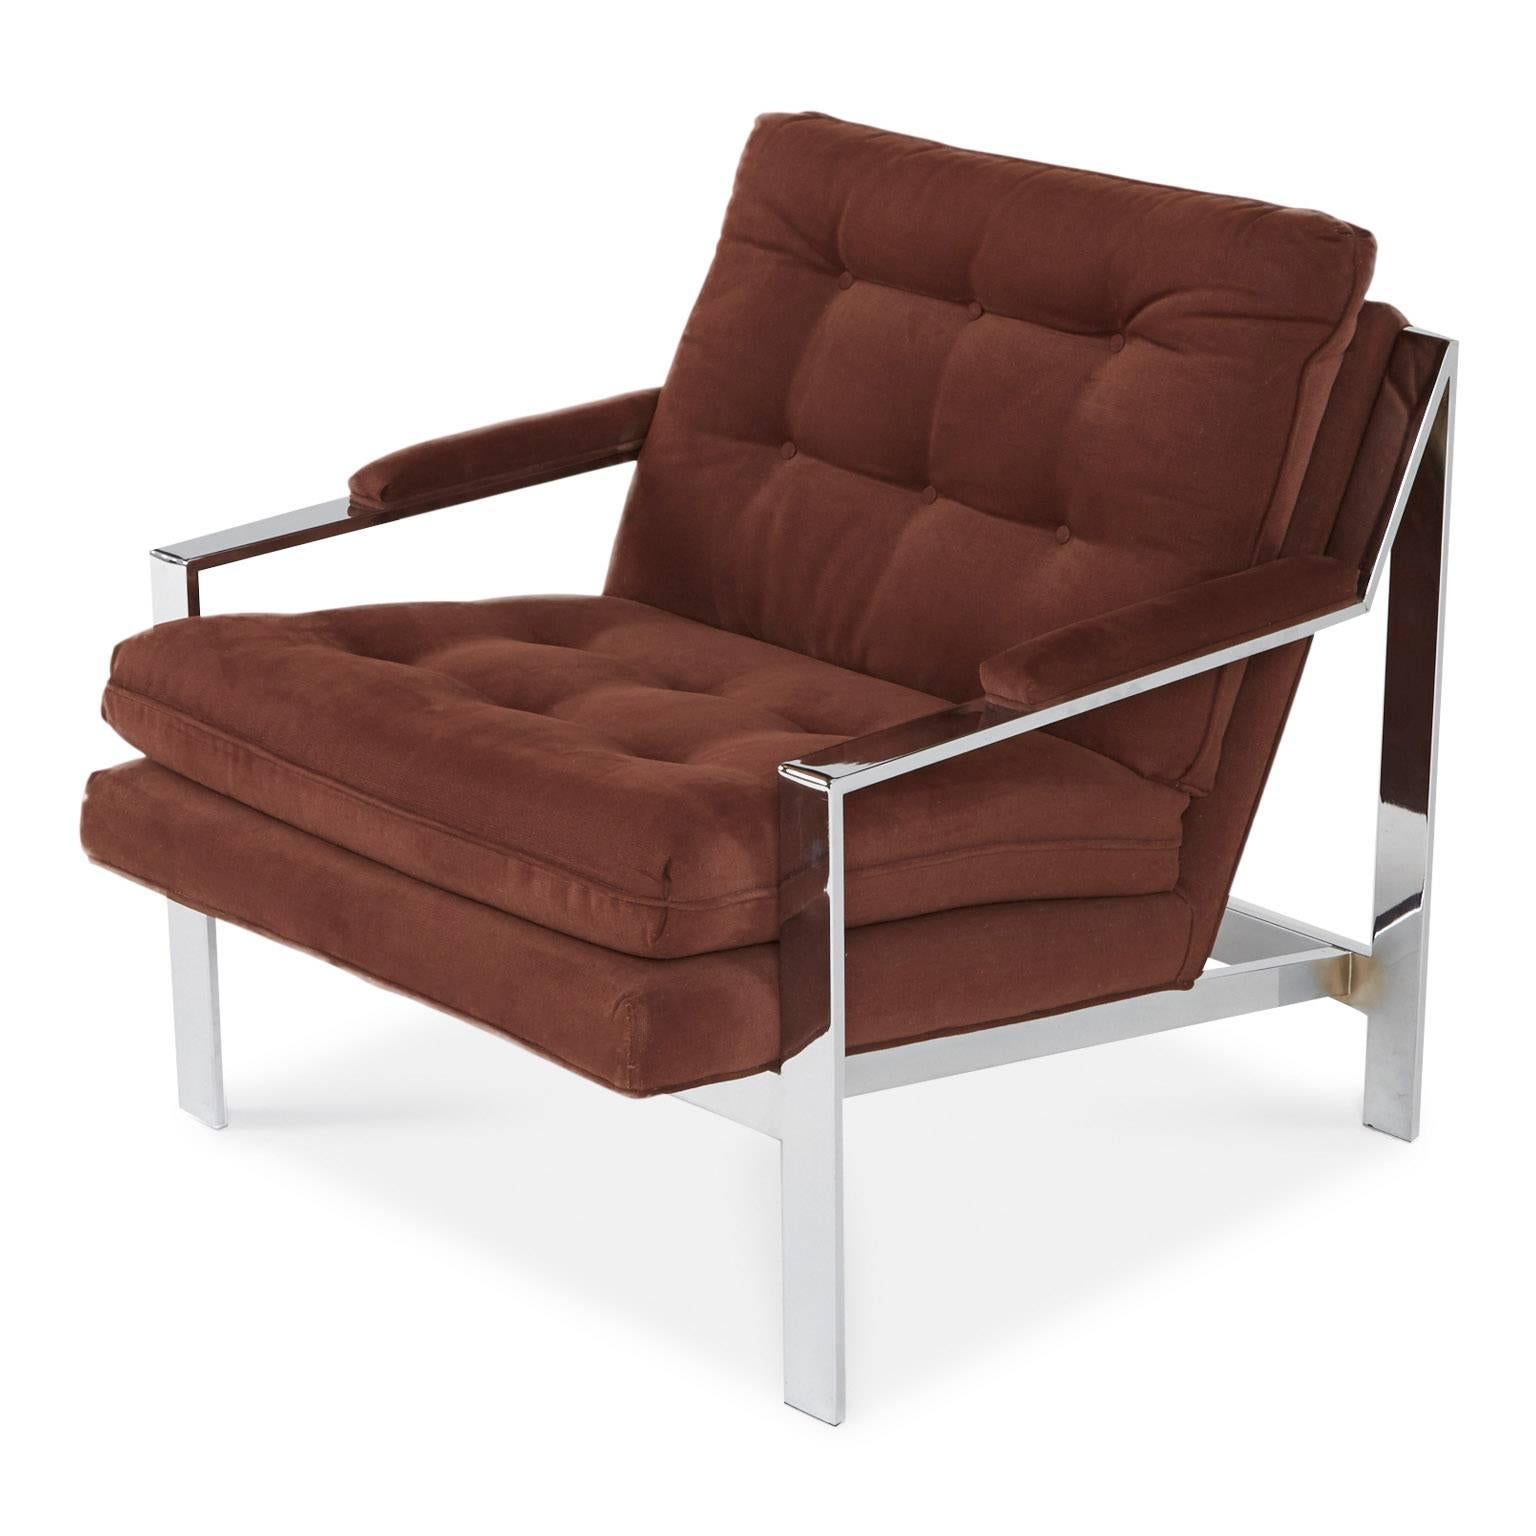 Designed by Cy Mann for Cy Mann Designs Ltd New York, this sleek club chair parallels Milo Baughman's recognized designs and attests to be an equal icon for Modern lounge seating.

With squared chrome frame and original tufted deep rust colored